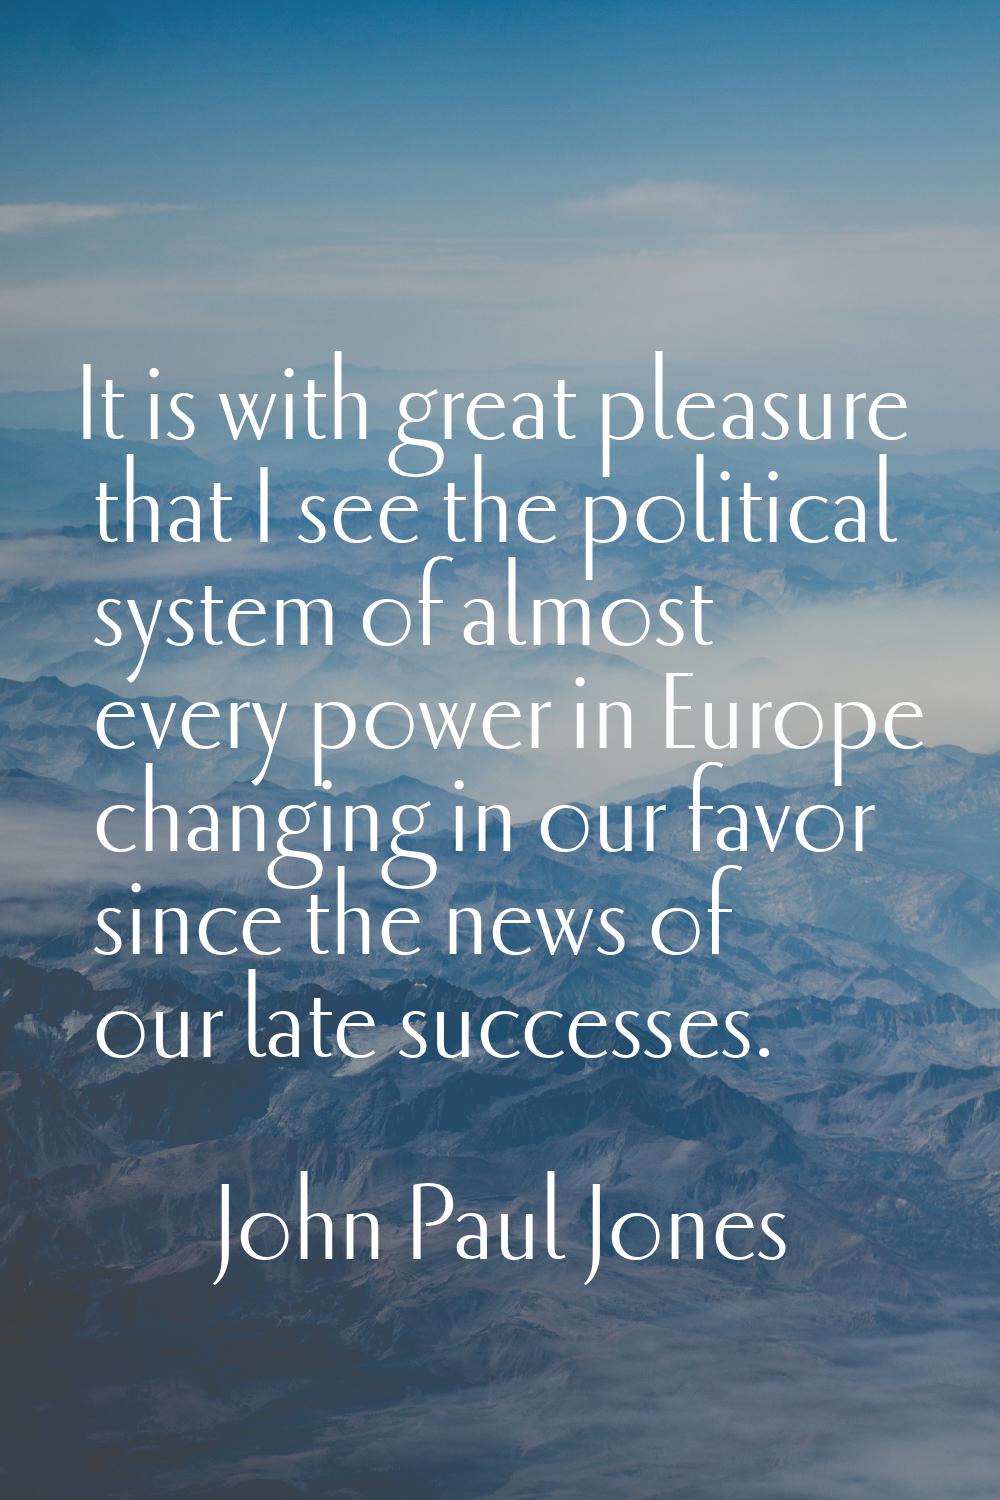 It is with great pleasure that I see the political system of almost every power in Europe changing 